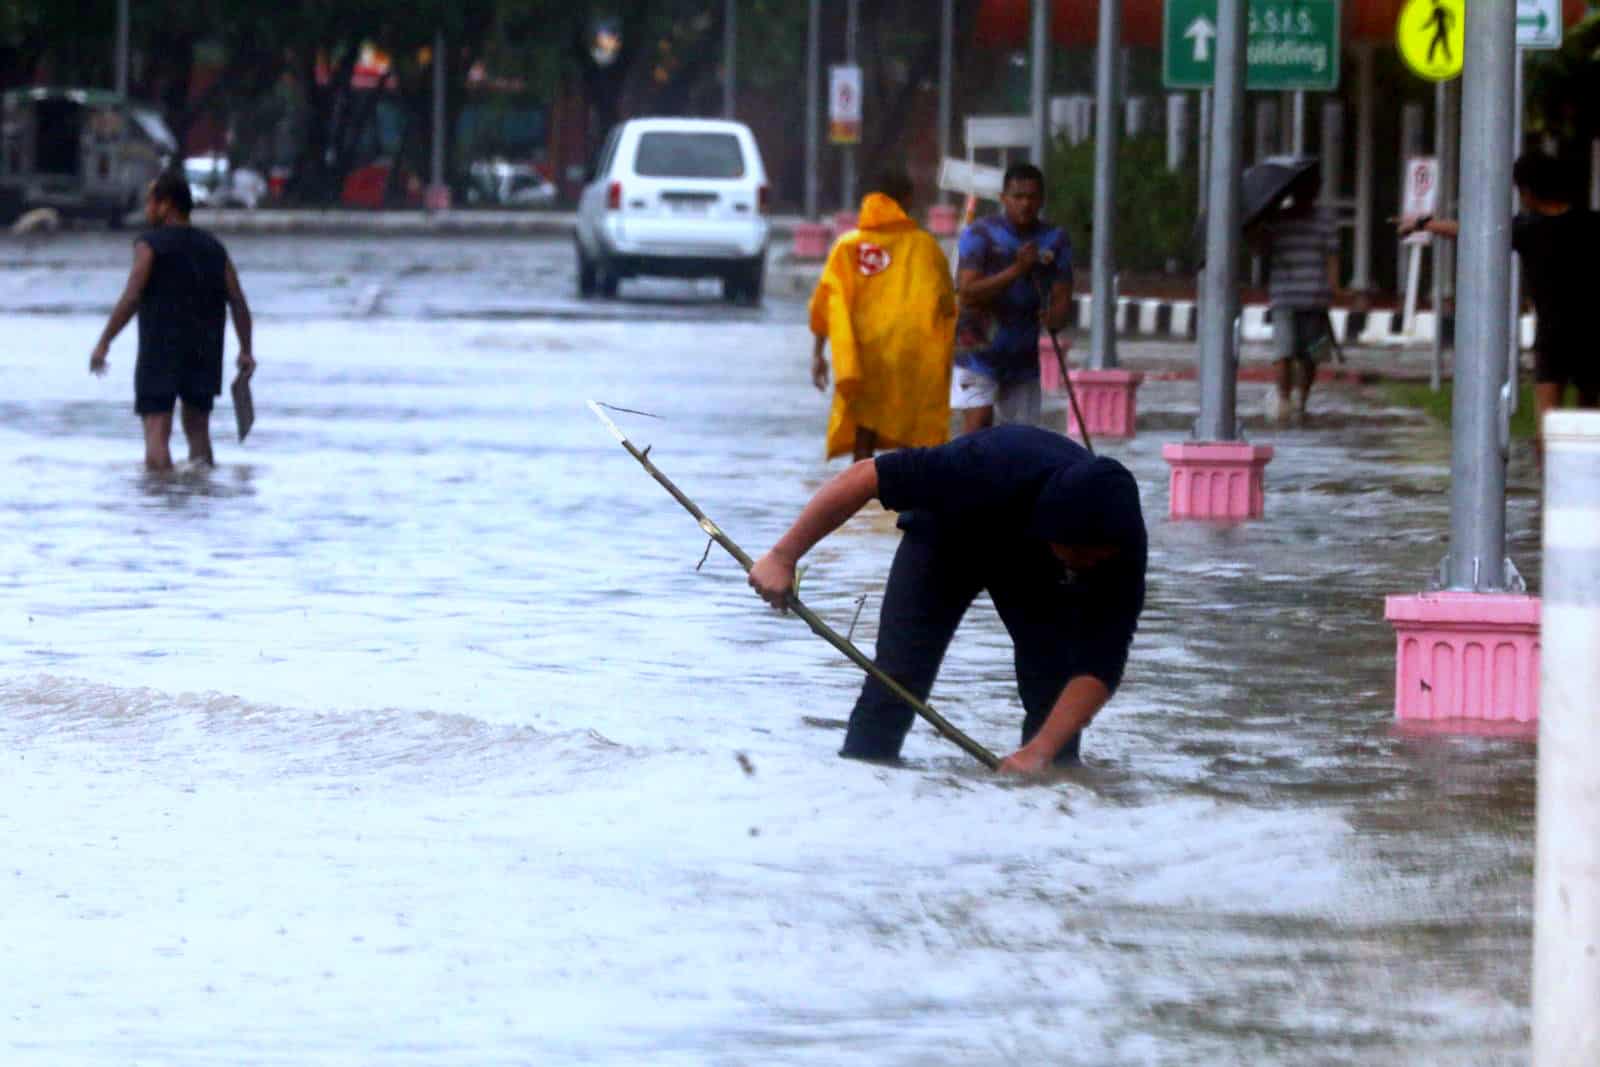 Flooding not caused by coastal development project – Pasay LGU